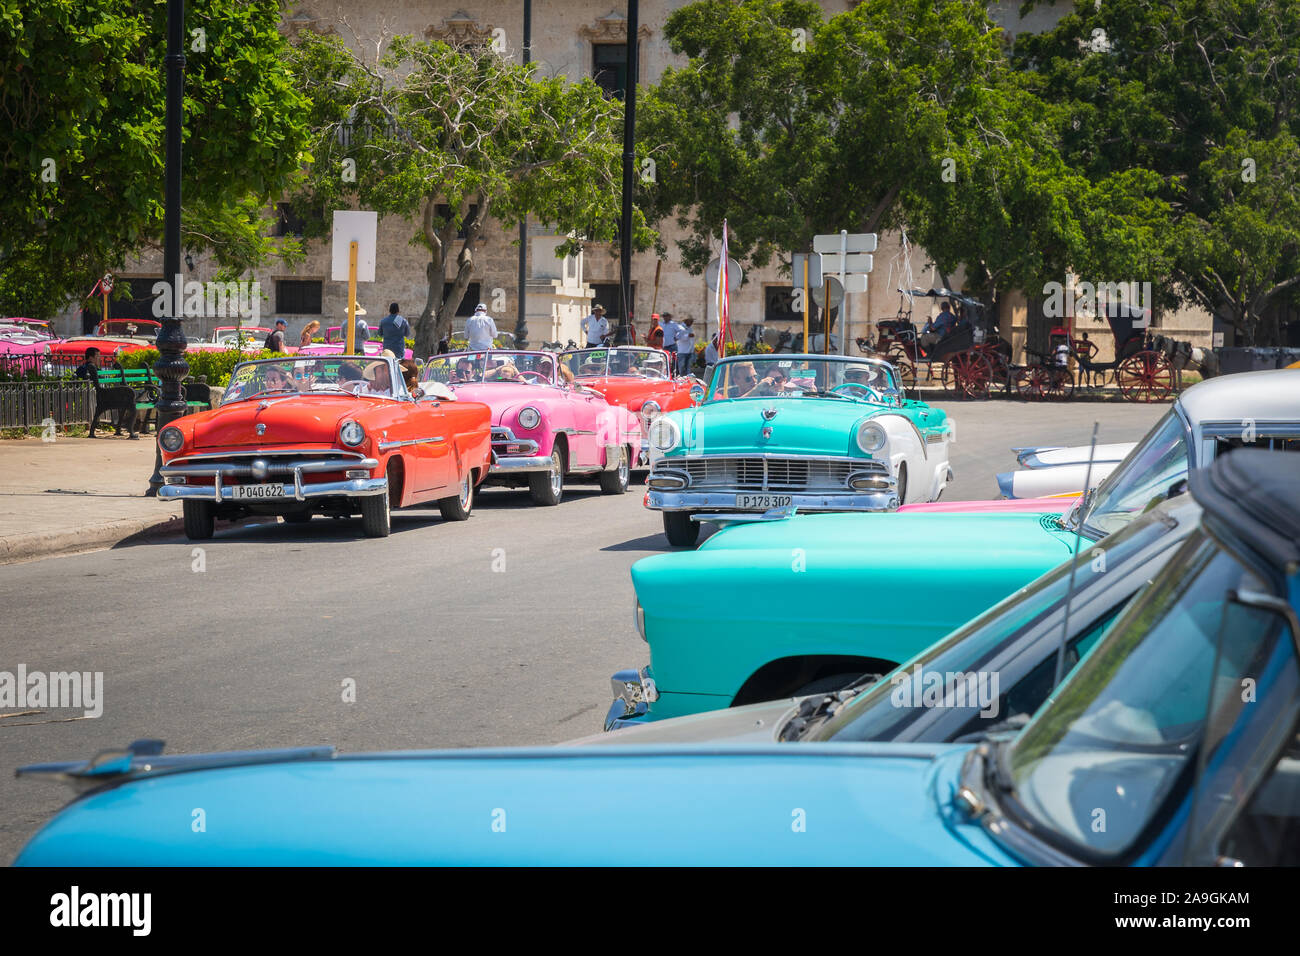 Havana, Cuba - July 23, 2018; typical colorful Cuban oldtimer classic cars driving and standing in a street of Habana during day time in summer Stock Photo